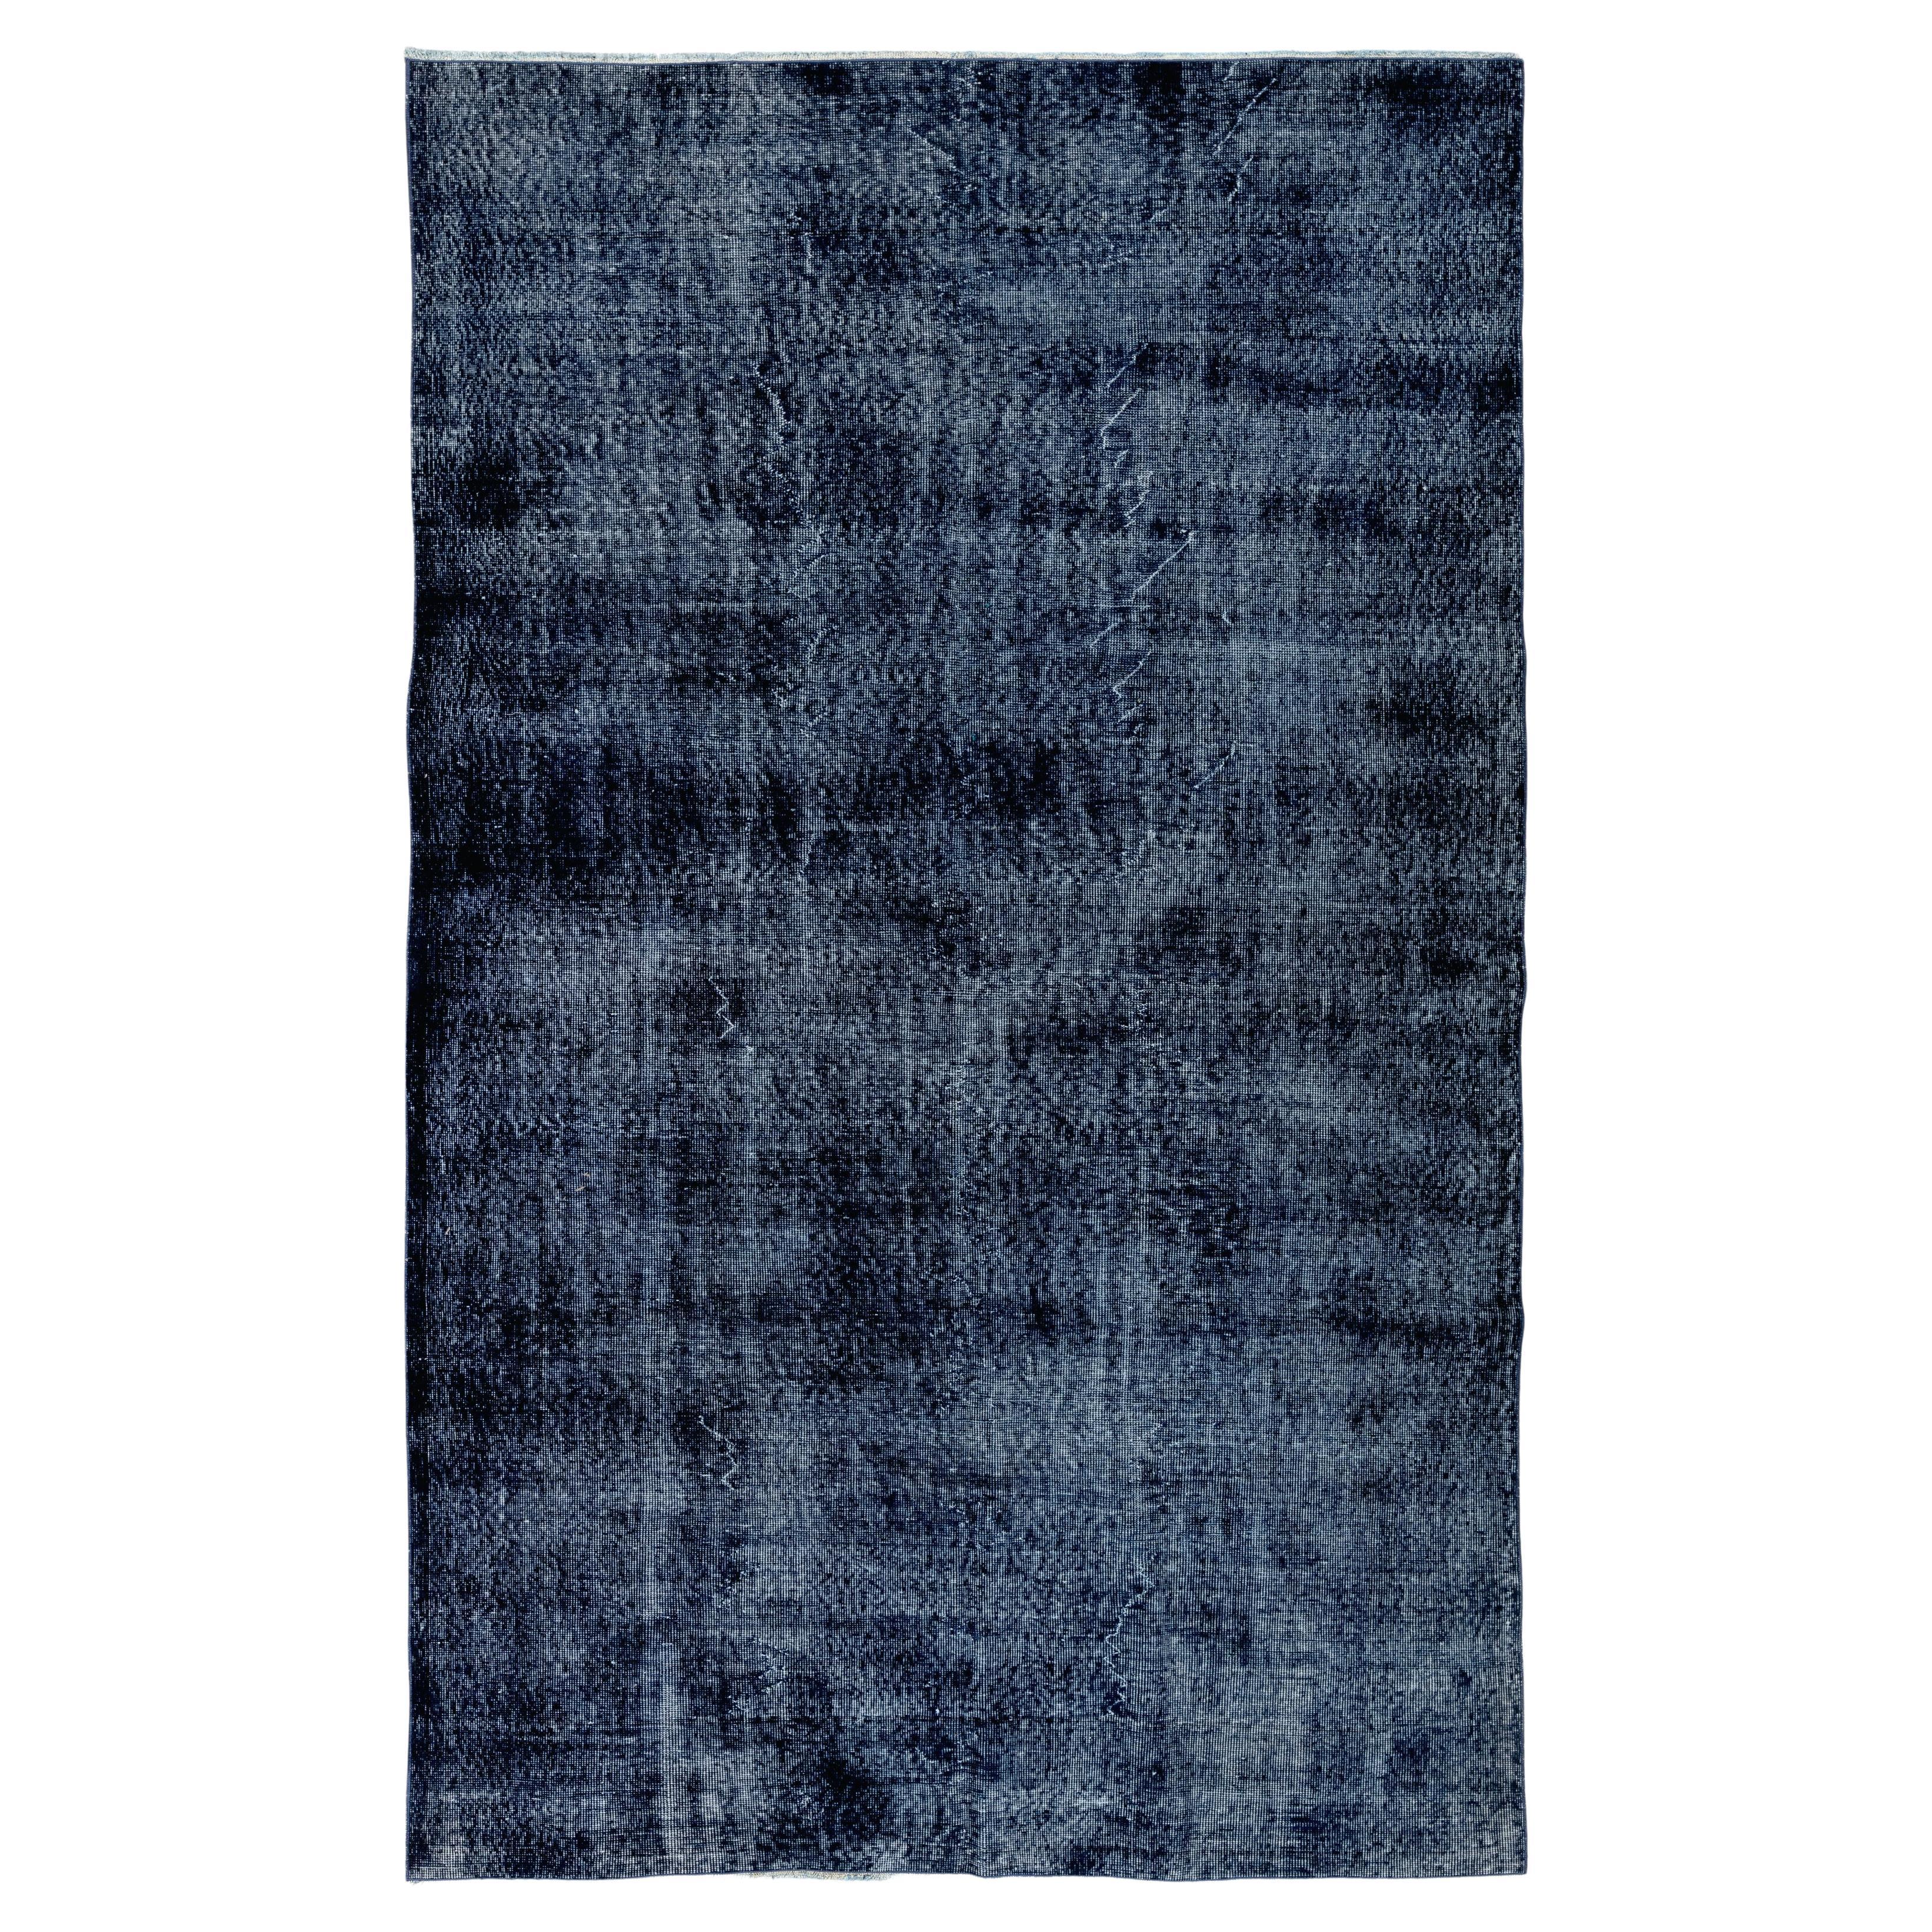 6.3x9.6 Ft Distressed Vintage Handmade Turkish Area Rug in Solid Navy Blue